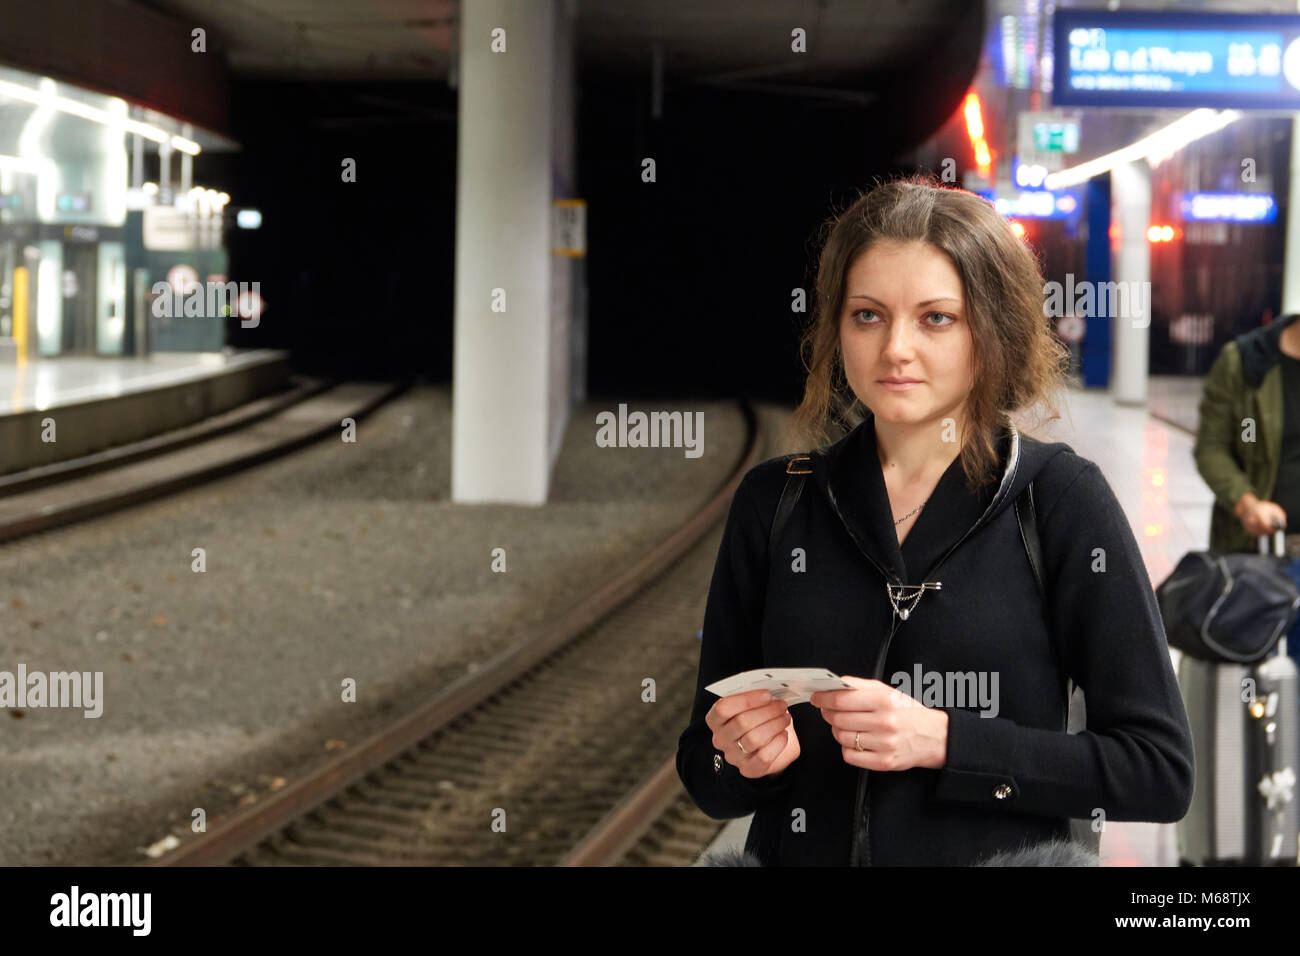 The girl passenger with a ticket in hand waiting for subway train. A woman traveling alone. Stock Photo